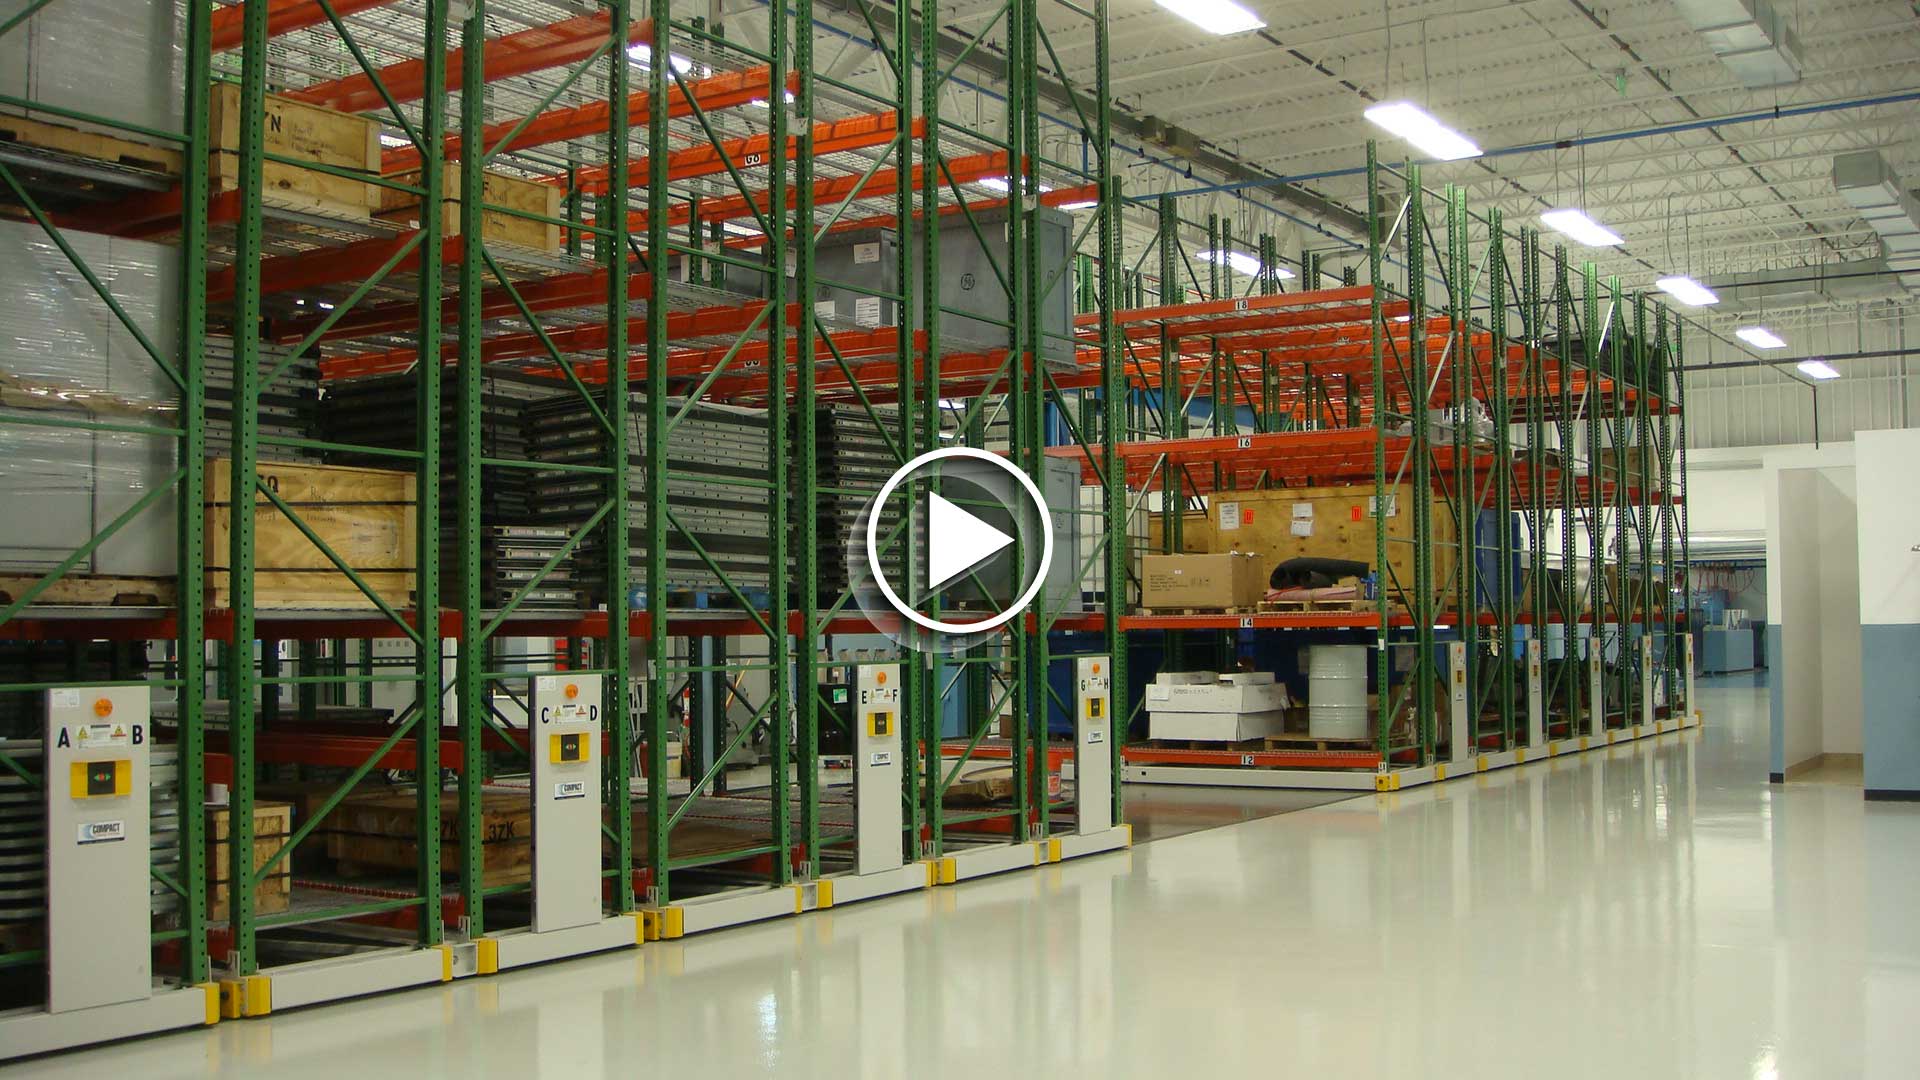 Case Study for Warehouse Storage